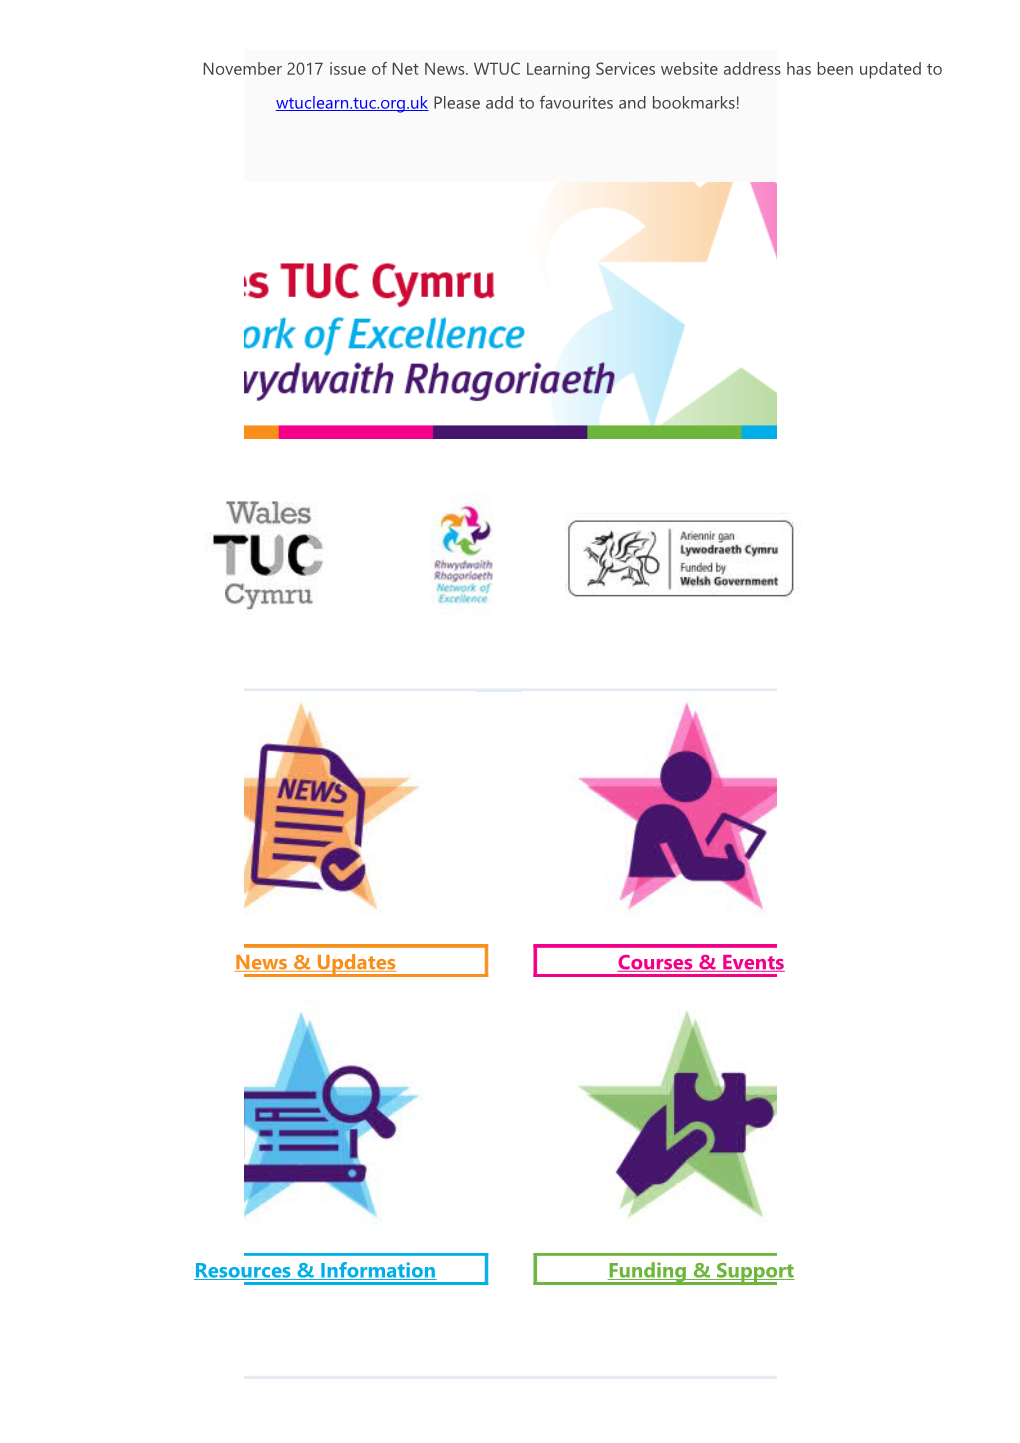 Wales Co-Operative Associate Digital Inclusion Practitioner